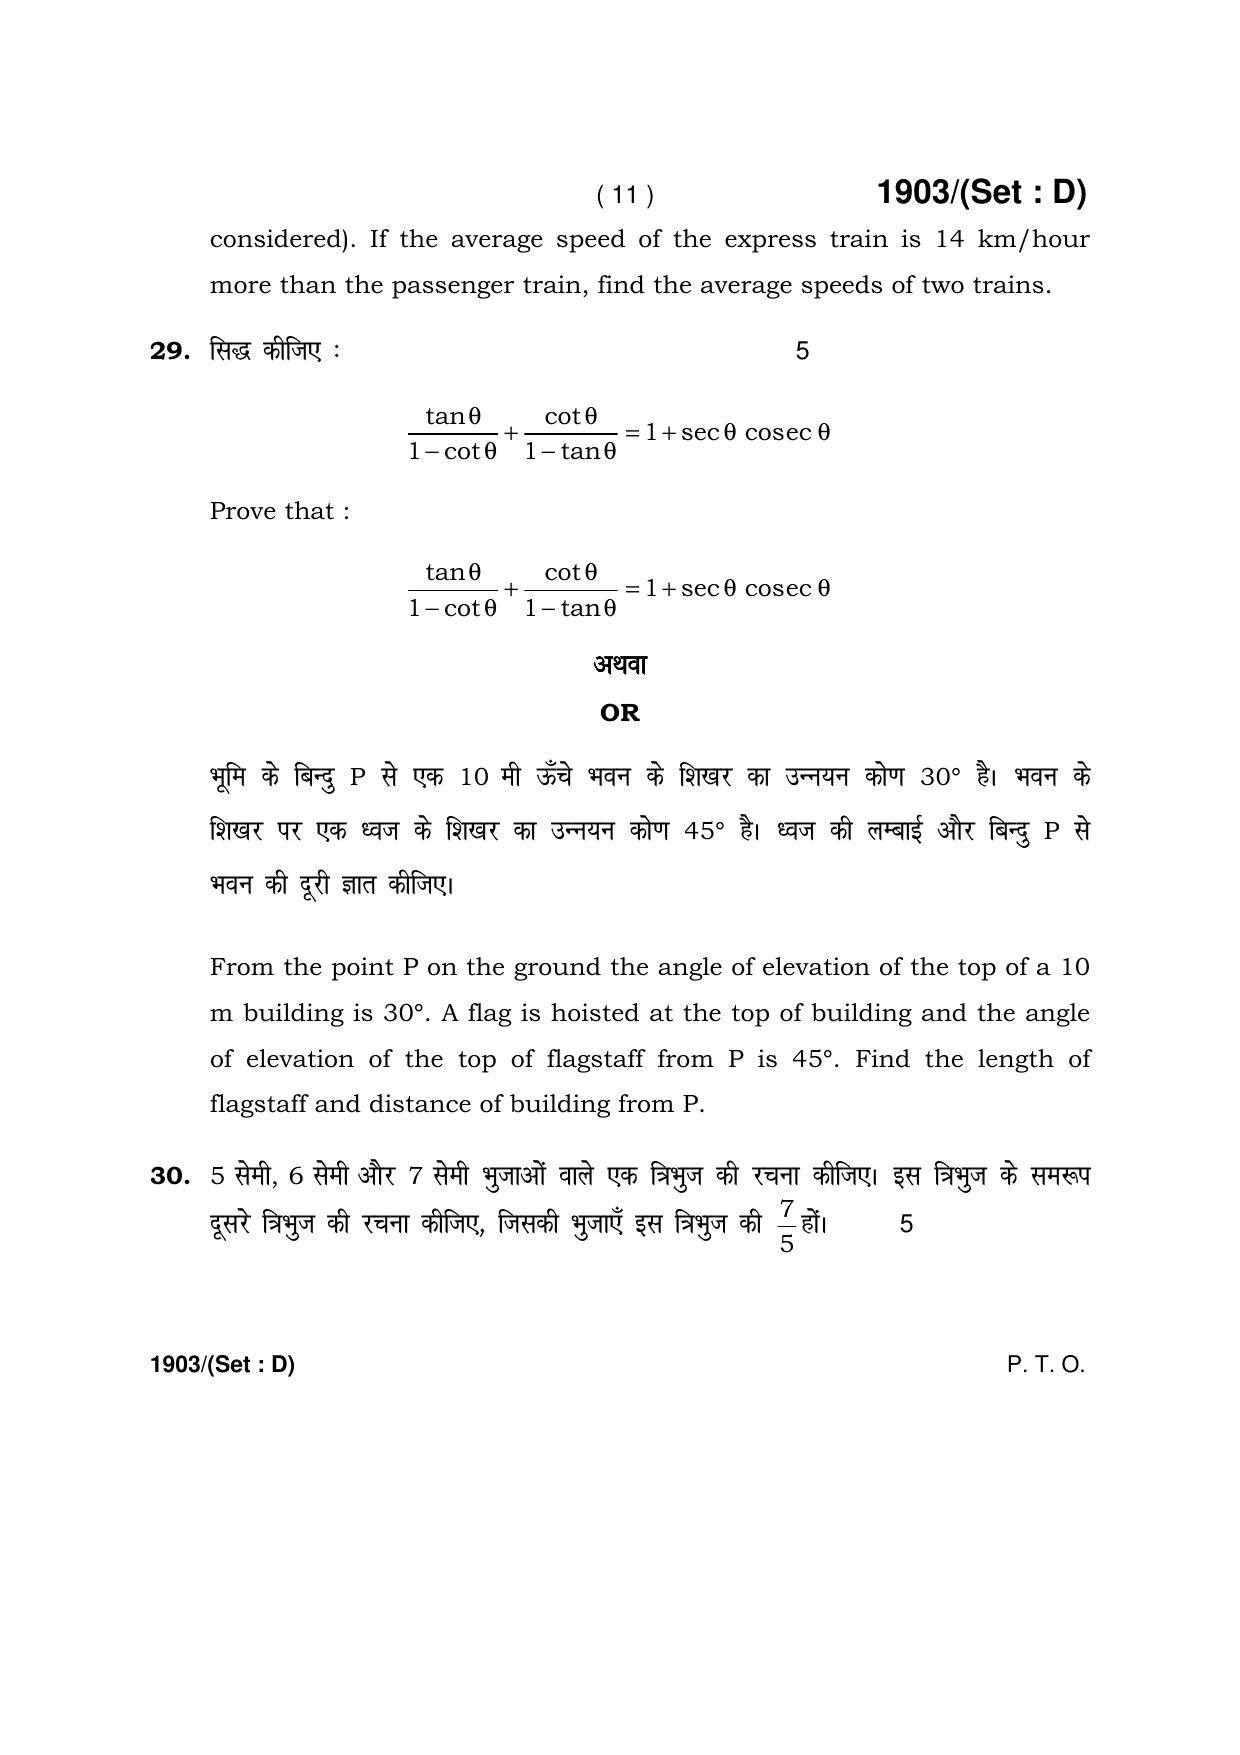 Haryana Board HBSE Class 10 Mathematics -D 2017 Question Paper - Page 11